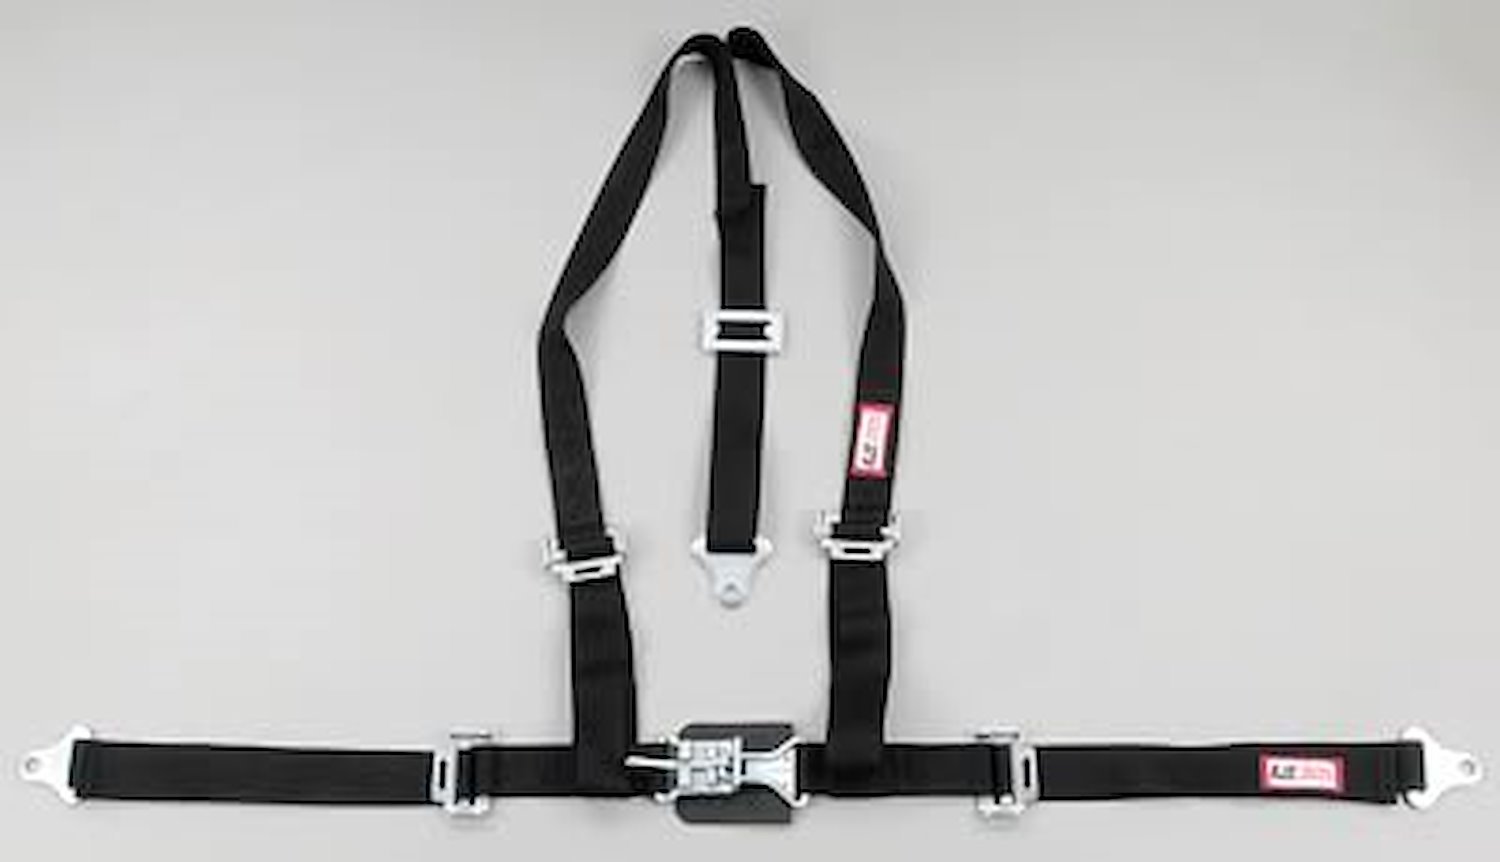 NON-SFI L&L HARNESS 2 PULL UP Lap Belt w/Adjuster SNAP 2 S.H. Individual FLOOR MOUNT w/STERNUM STRAP WRAP/SNAP BLUE